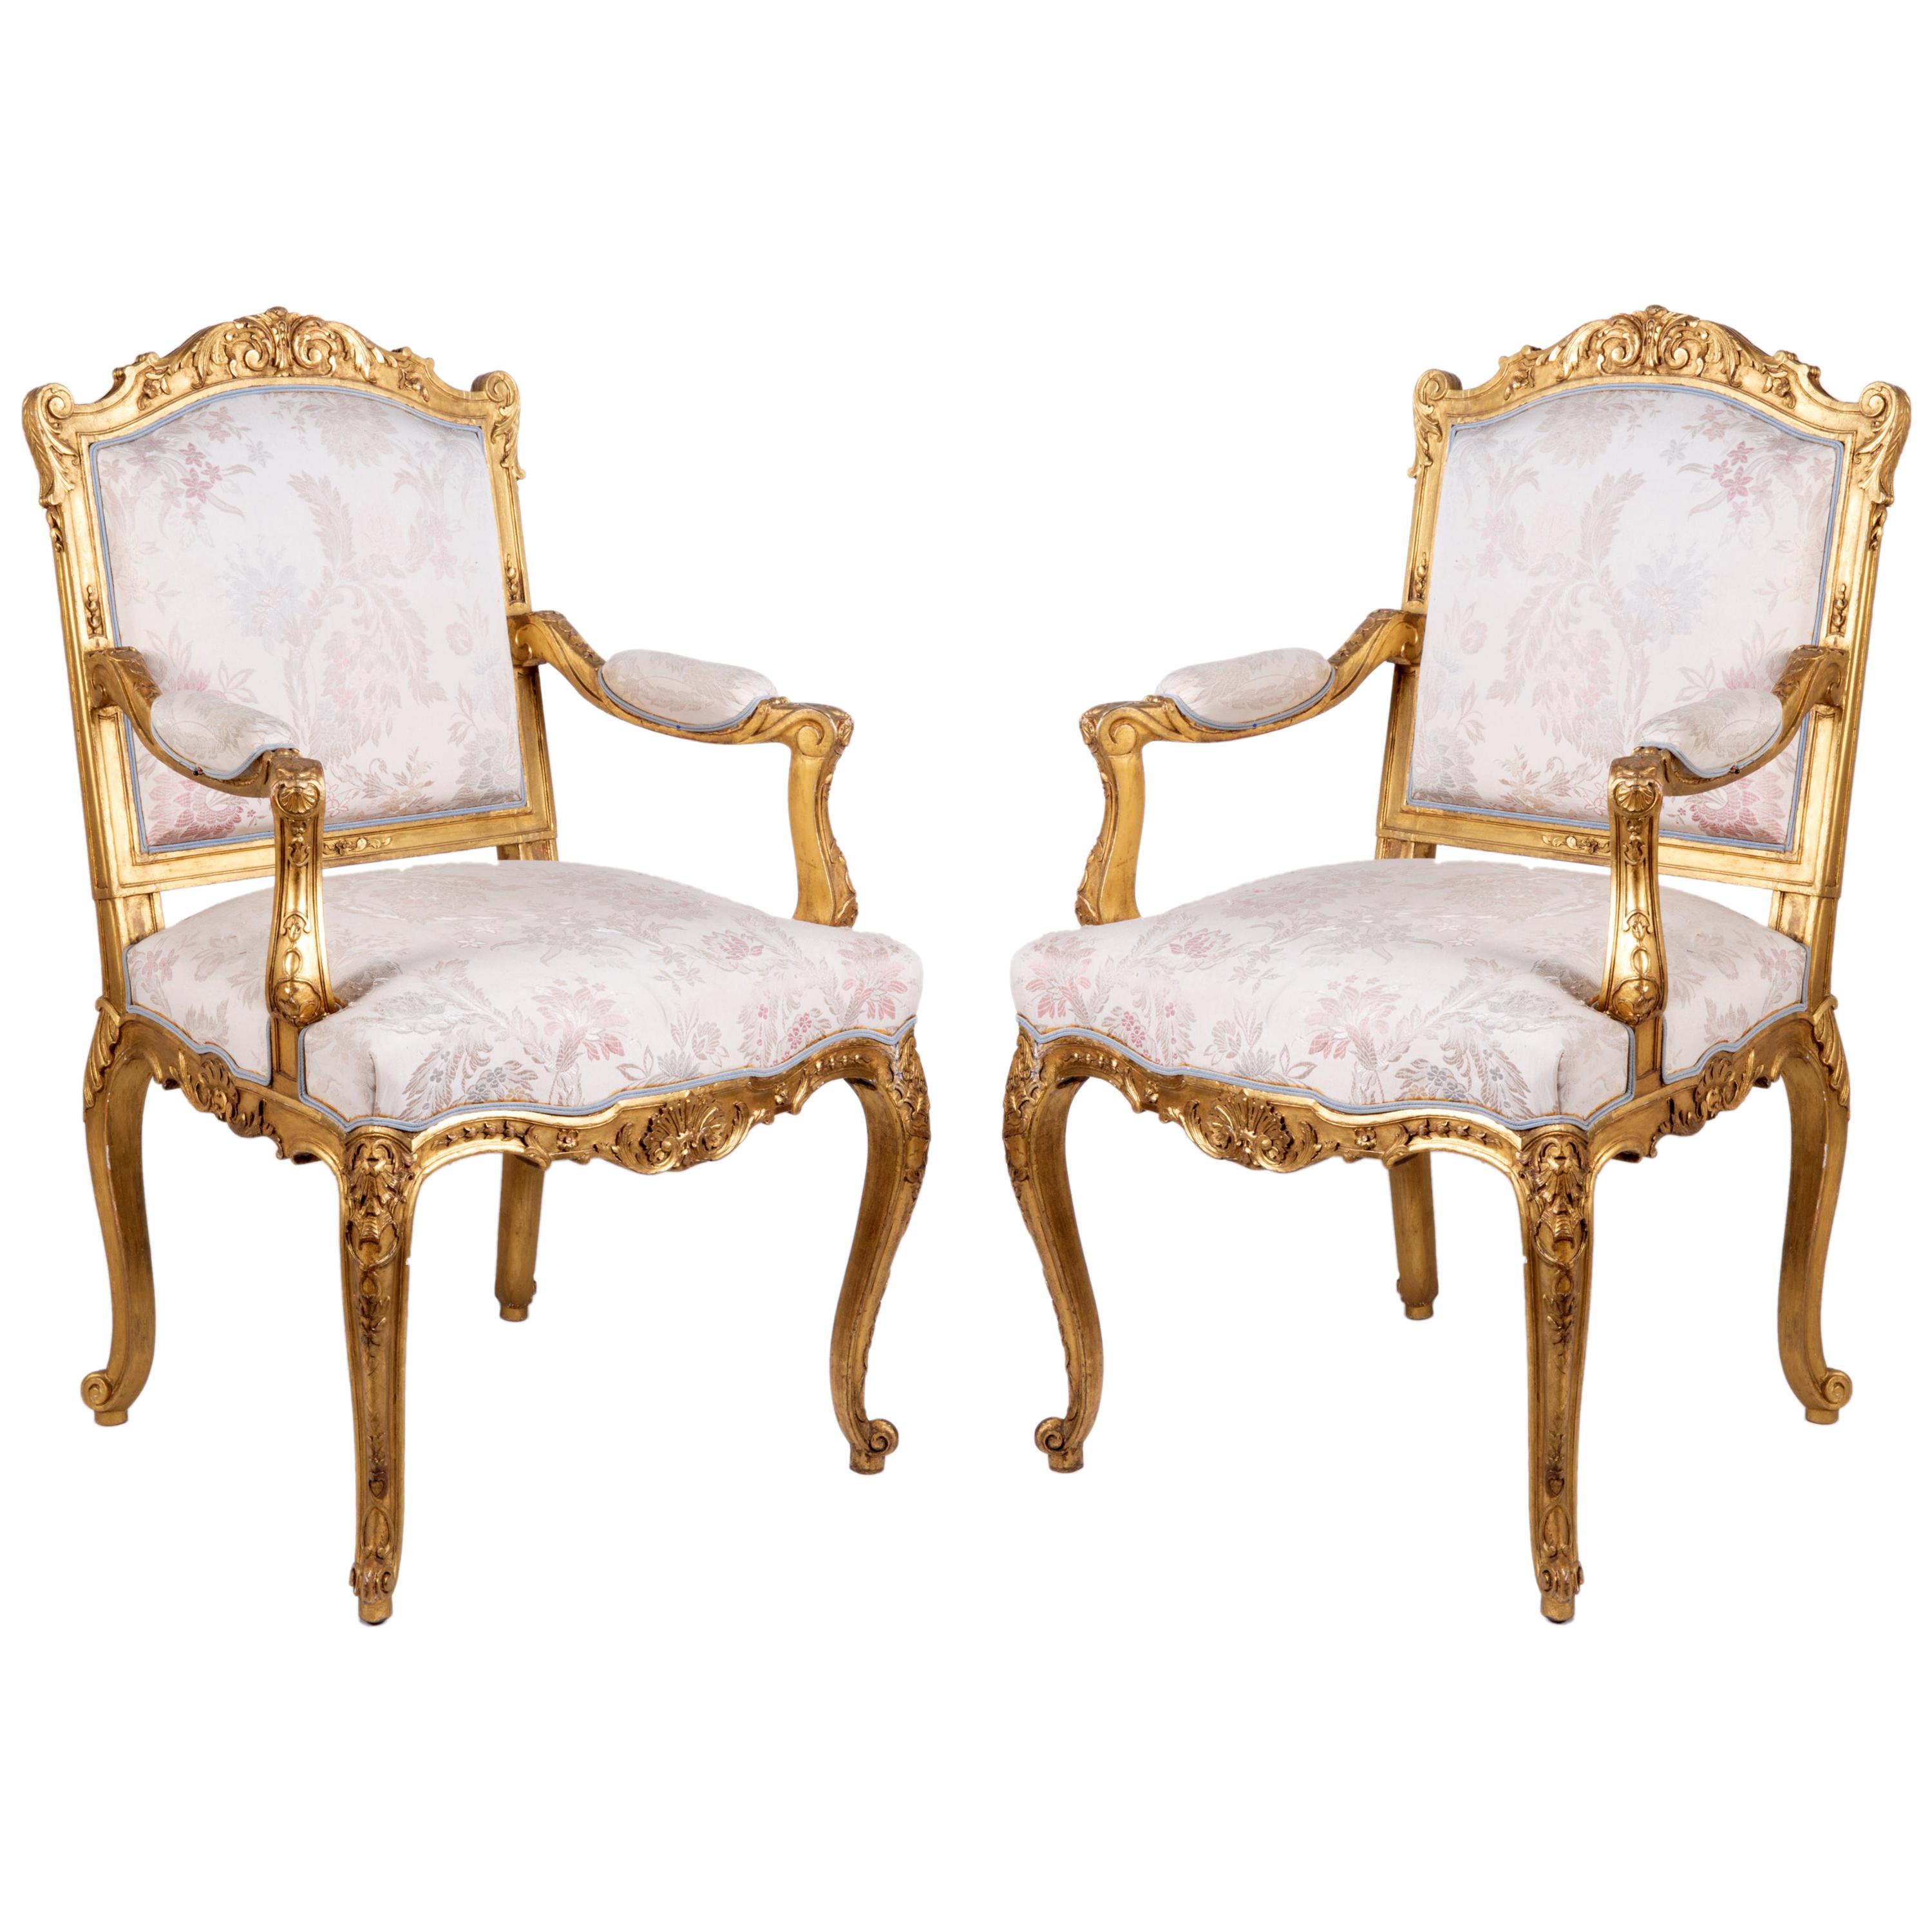 Pair of Louis XVI Style Carved Giltwood Armchairs, by Mellier & Co